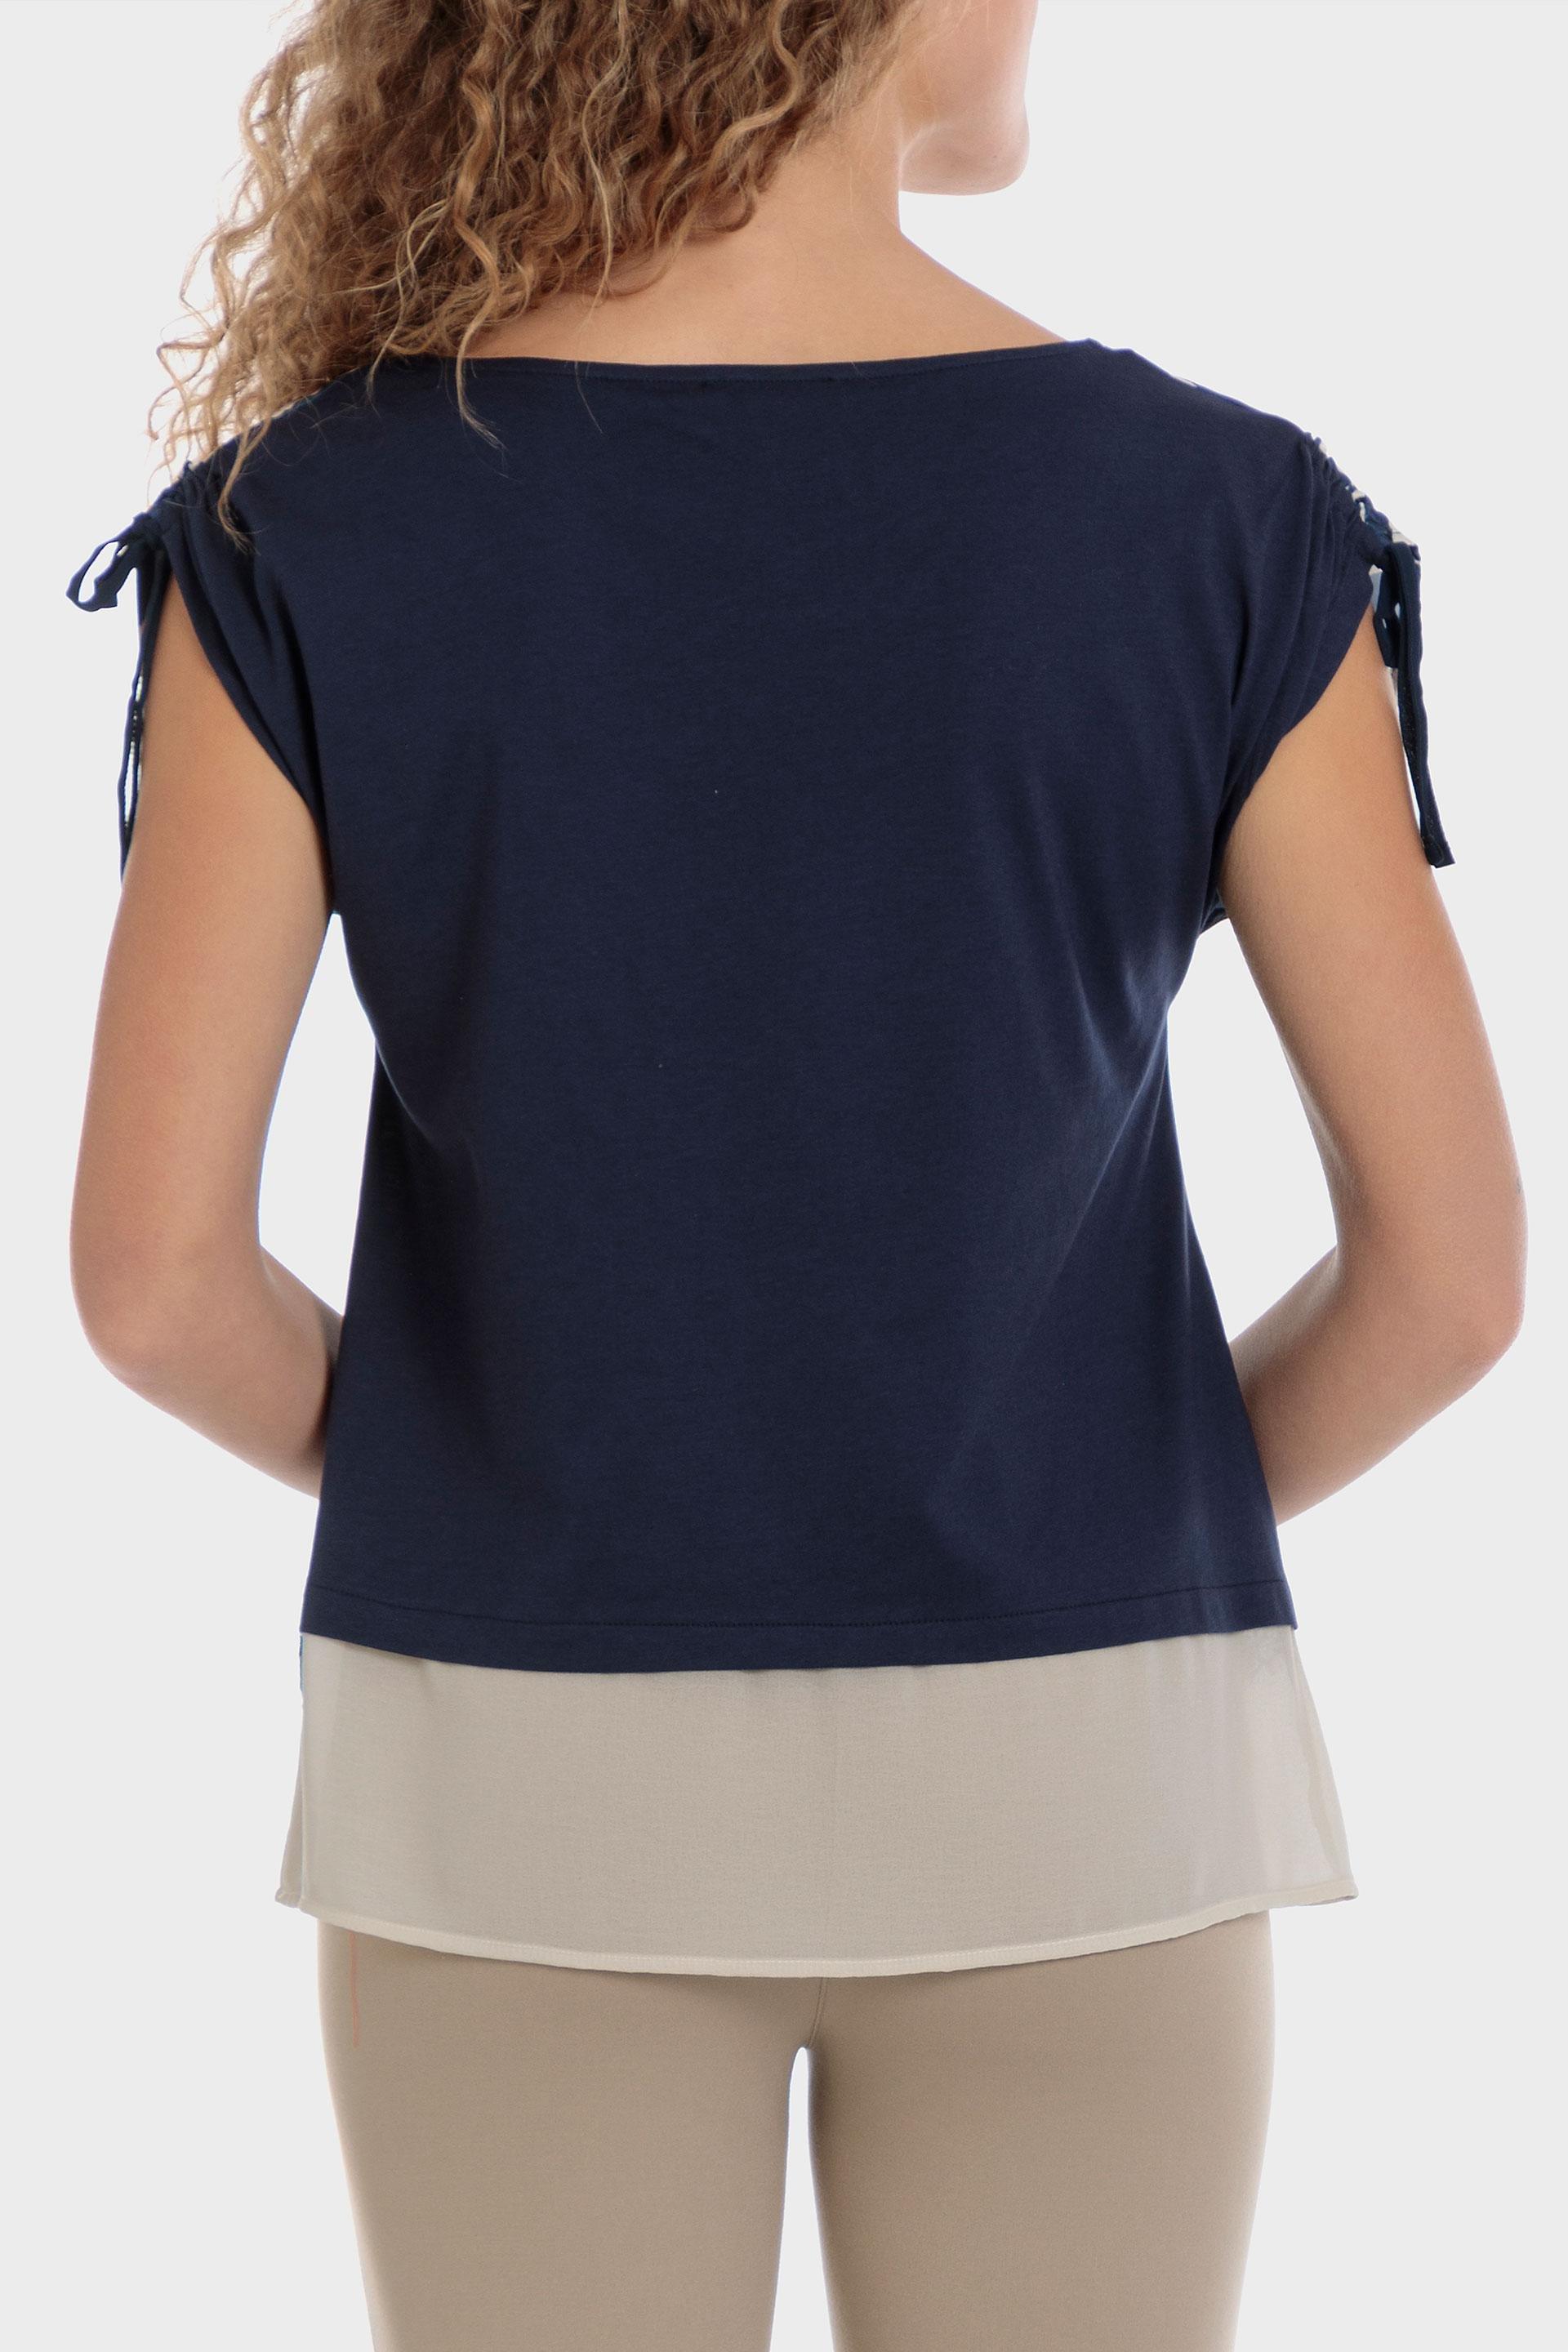 Punt Roma - Navy Lace Printed T-Shirt